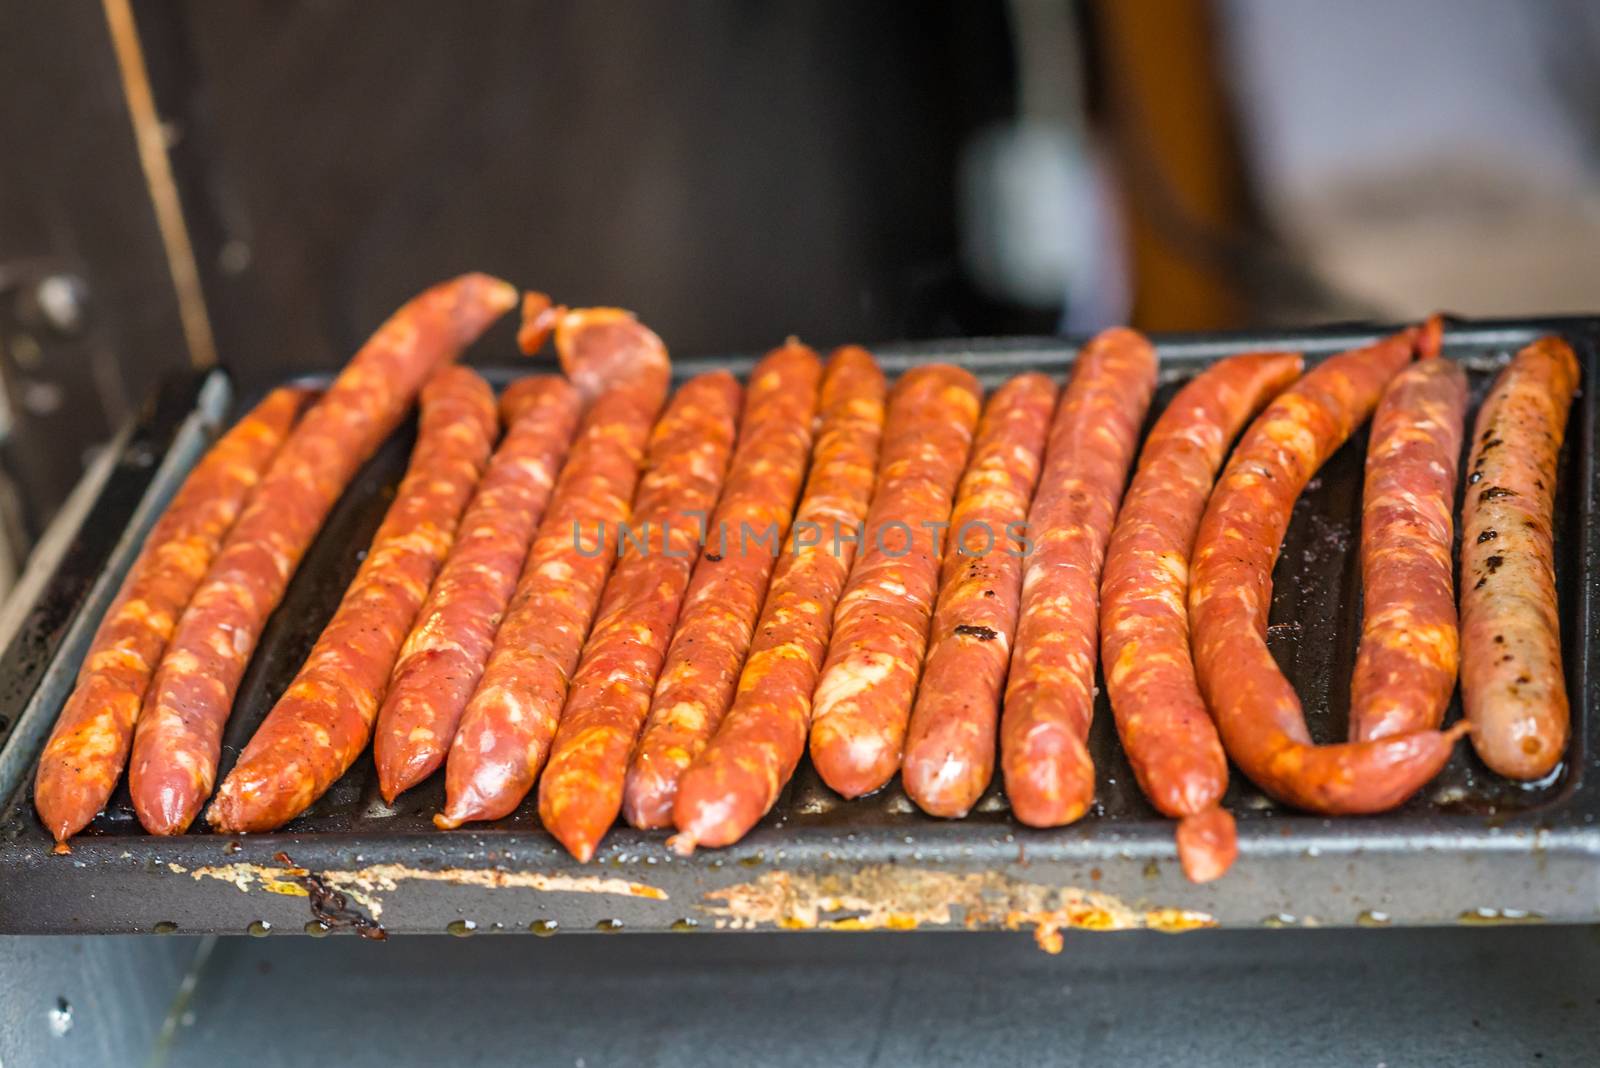 raw homemade sausages prepared on the grill